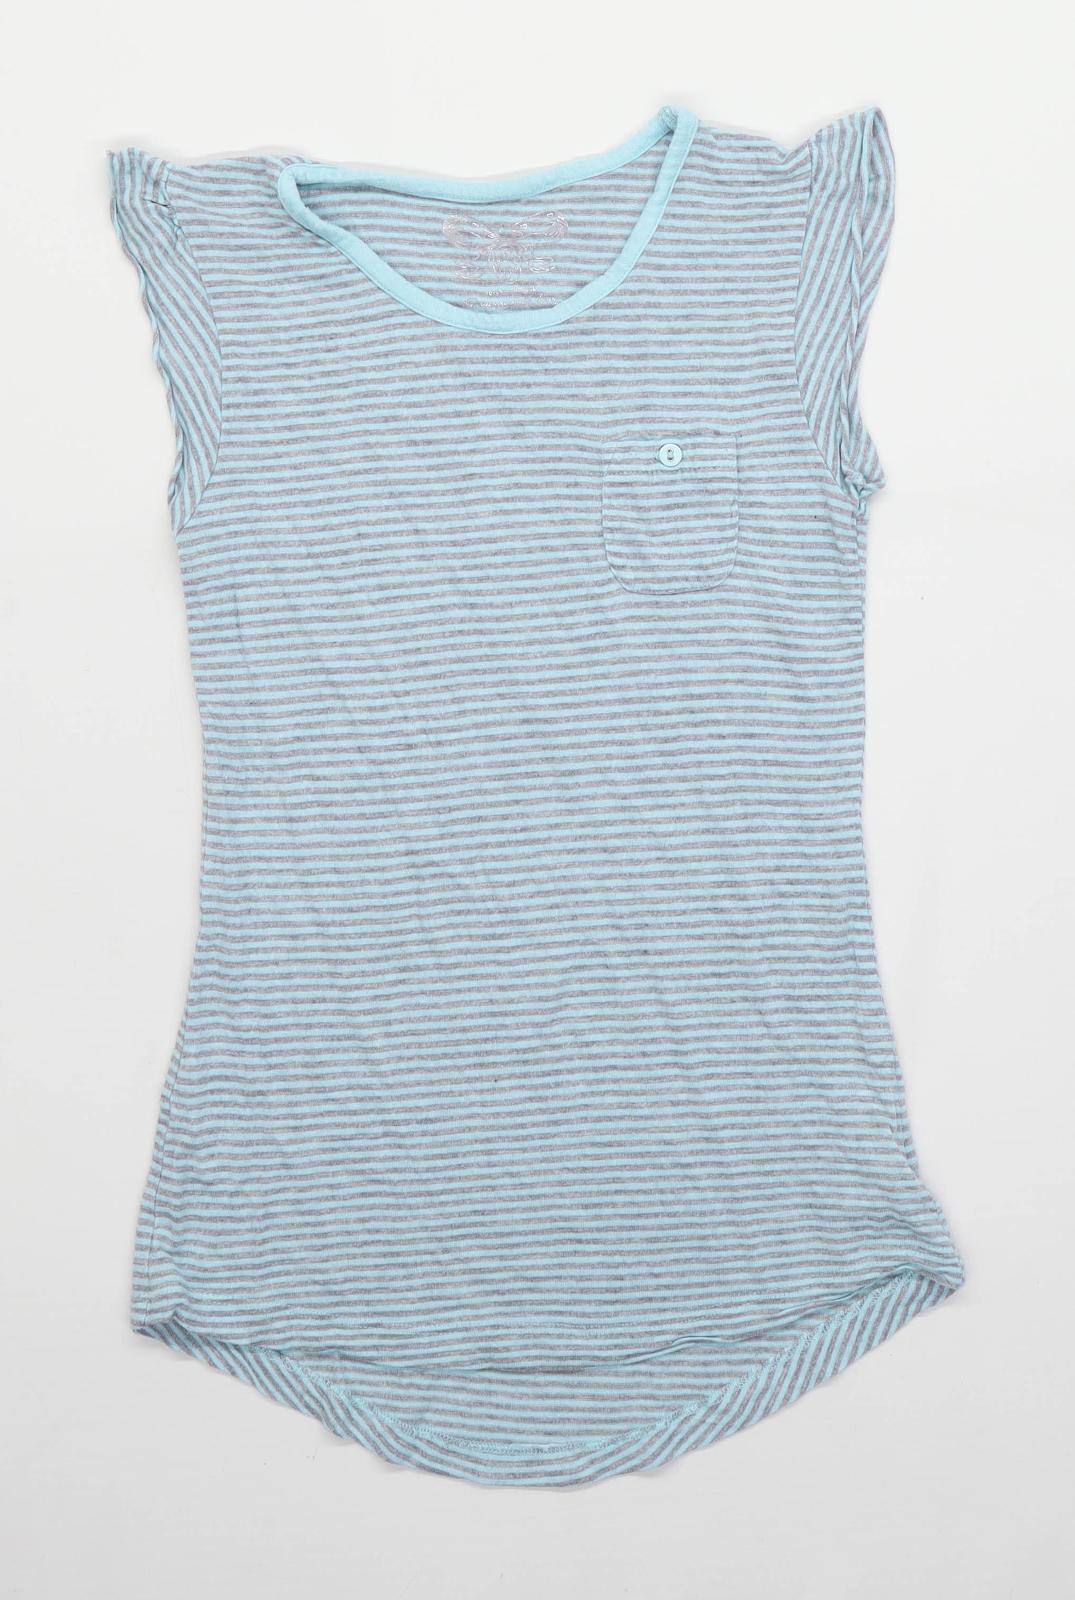 Young Dimension Girls Striped Blue T-Shirt Age 10-11 Years